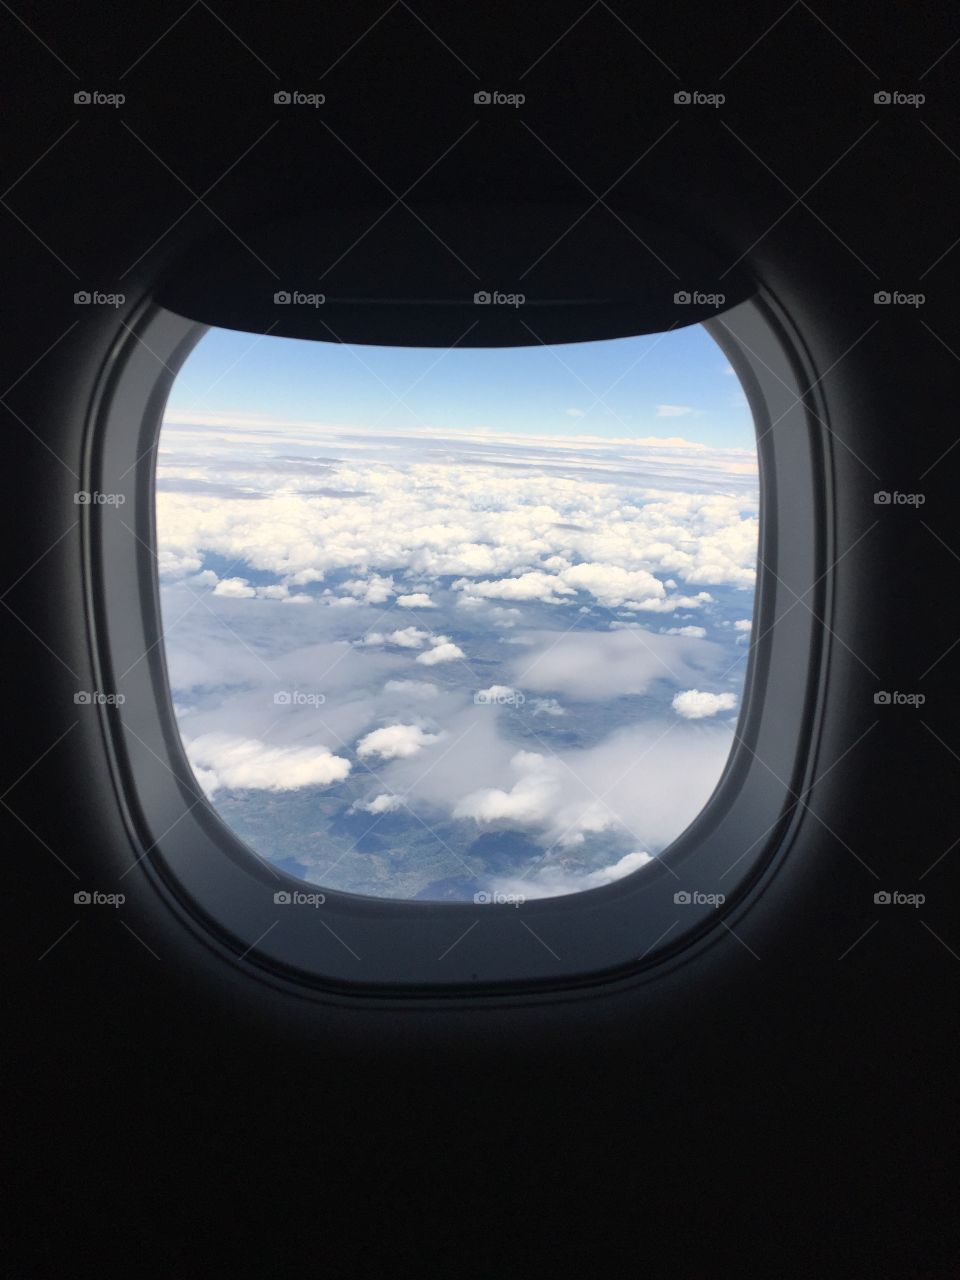 From the plane window